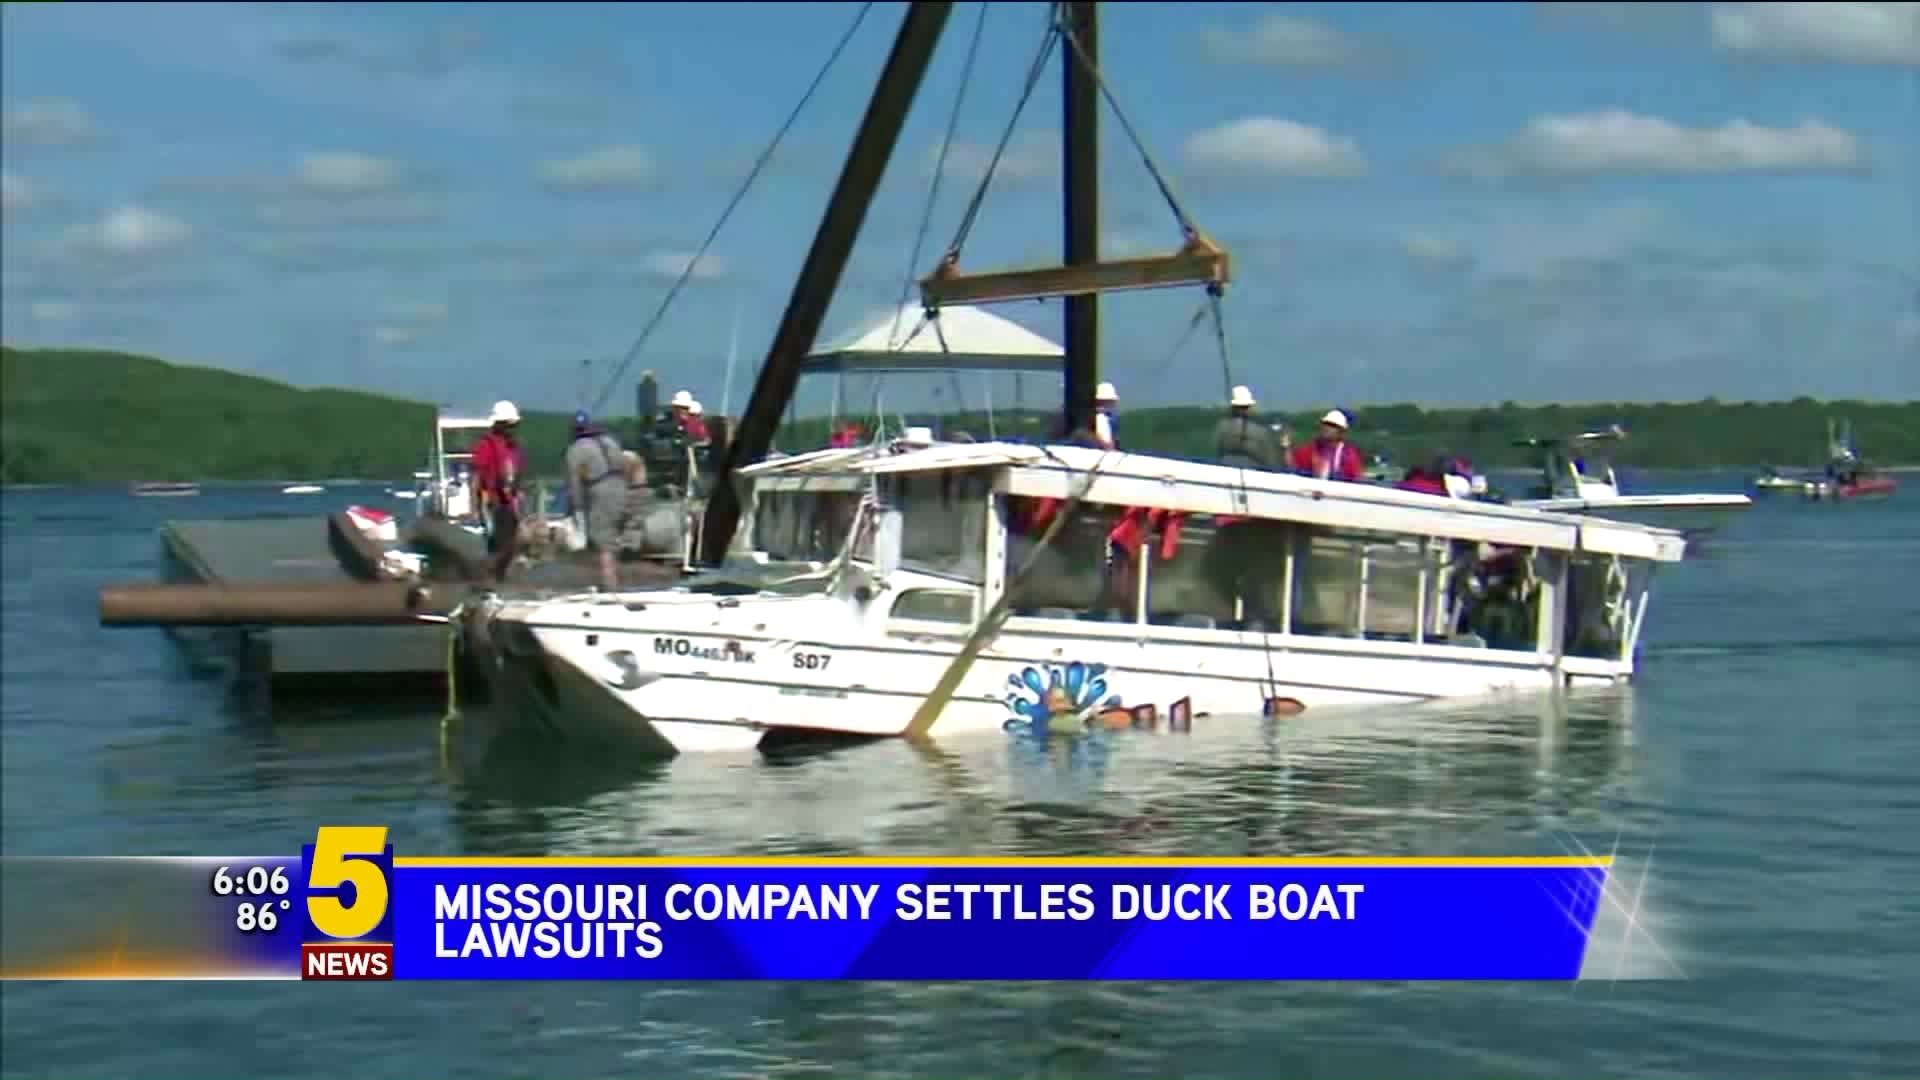 Missouri Company Settles Some Duck Boat Lawsuits